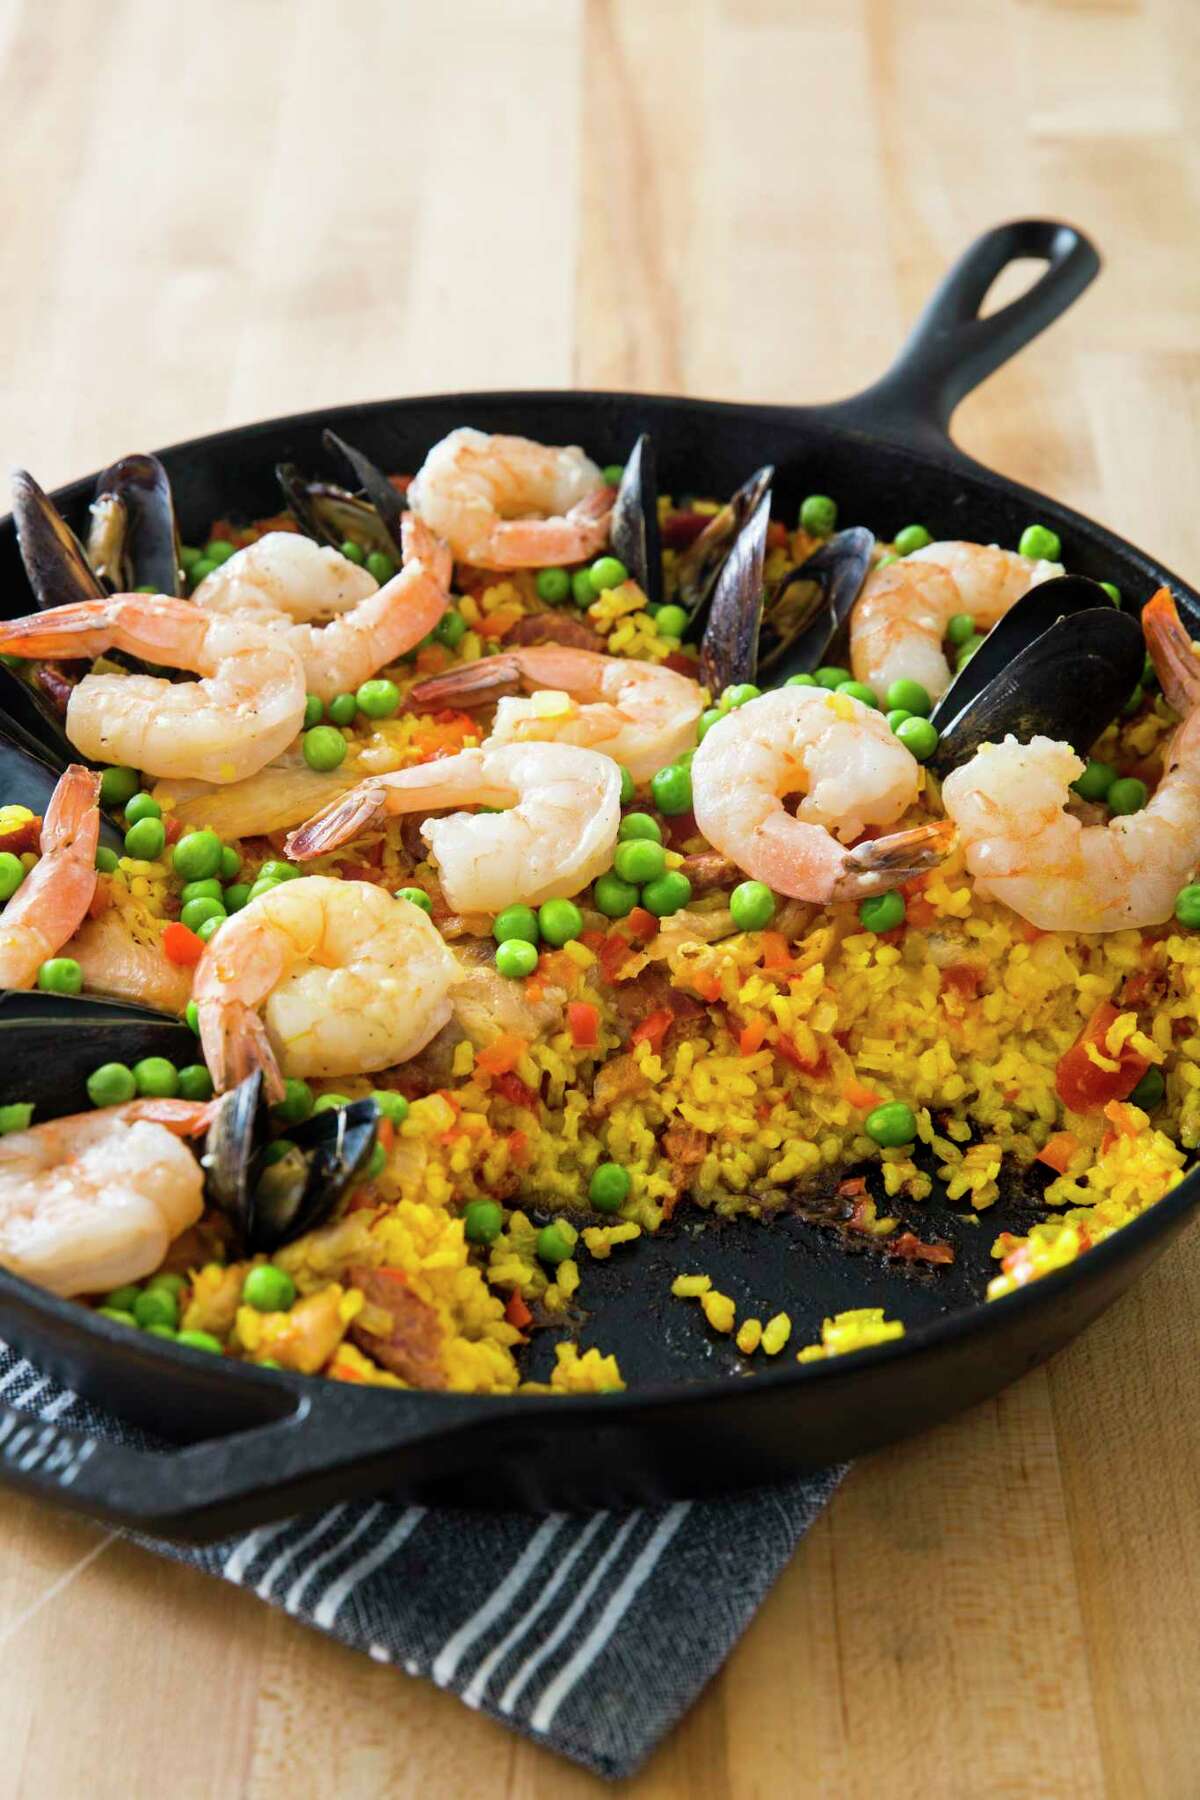 Paella recipe made in a cast iron pan from America's Test Kitchen.